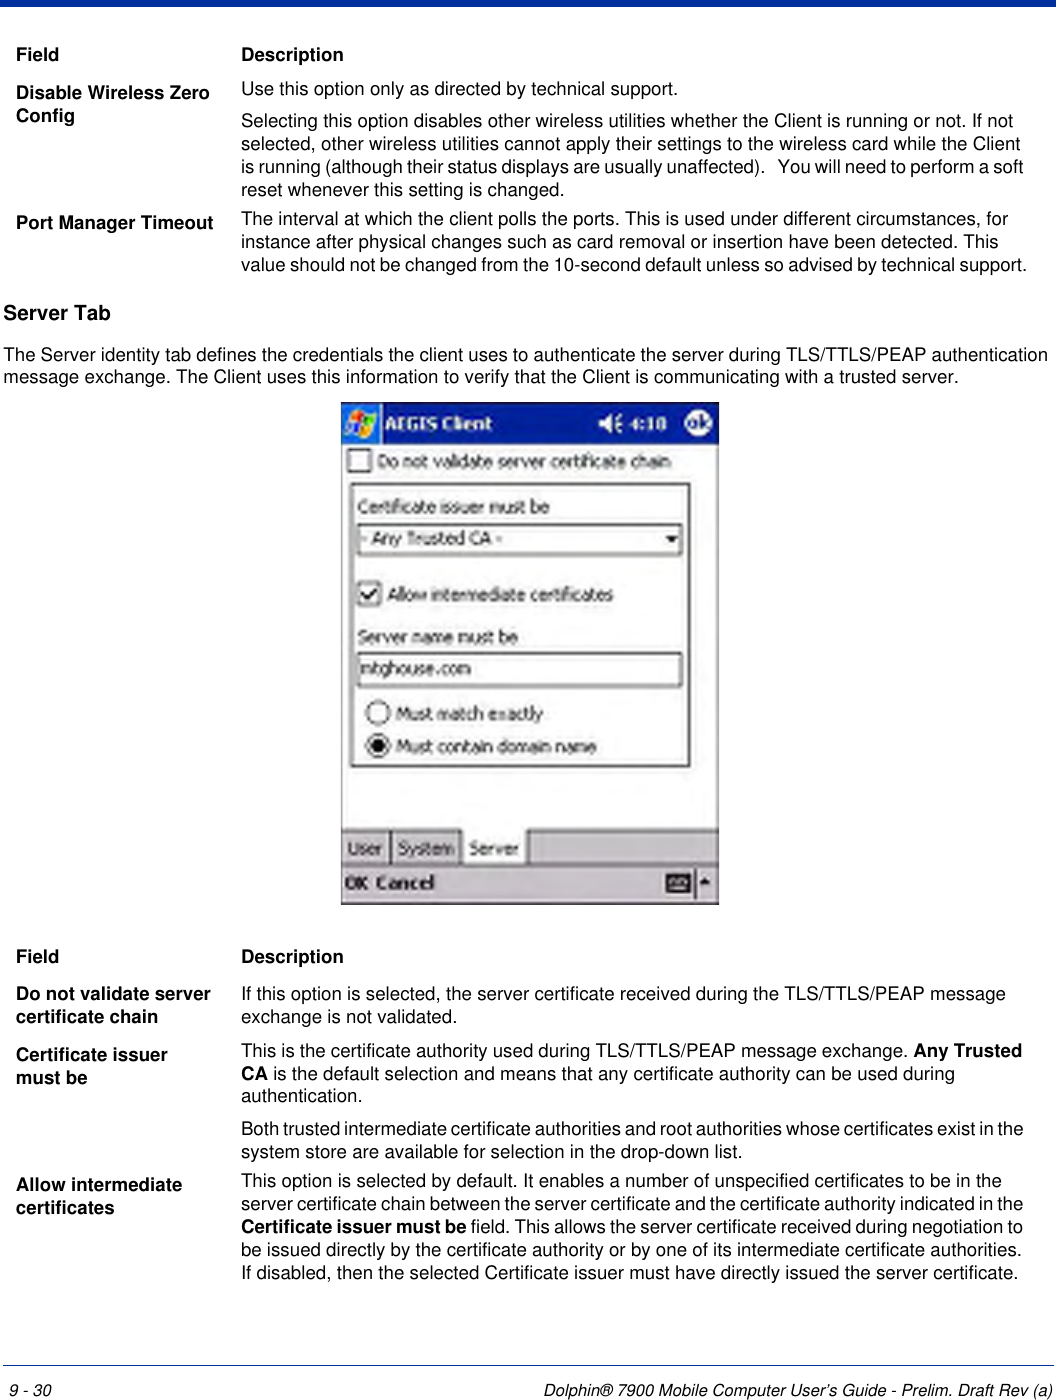 9 - 30 Dolphin® 7900 Mobile Computer User’s Guide - Prelim. Draft Rev (a)Server TabThe Server identity tab defines the credentials the client uses to authenticate the server during TLS/TTLS/PEAP authentication message exchange. The Client uses this information to verify that the Client is communicating with a trusted server. Disable Wireless Zero ConfigUse this option only as directed by technical support.Selecting this option disables other wireless utilities whether the Client is running or not. If not selected, other wireless utilities cannot apply their settings to the wireless card while the Client is running (although their status displays are usually unaffected).   You will need to perform a soft reset whenever this setting is changed. Port Manager Timeout The interval at which the client polls the ports. This is used under different circumstances, for instance after physical changes such as card removal or insertion have been detected. This value should not be changed from the 10-second default unless so advised by technical support.Field DescriptionDo not validate server certificate chain If this option is selected, the server certificate received during the TLS/TTLS/PEAP message exchange is not validated.Certificate issuer must be This is the certificate authority used during TLS/TTLS/PEAP message exchange. Any Trusted CA is the default selection and means that any certificate authority can be used during authentication.Both trusted intermediate certificate authorities and root authorities whose certificates exist in the system store are available for selection in the drop-down list. Allow intermediate certificatesThis option is selected by default. It enables a number of unspecified certificates to be in the server certificate chain between the server certificate and the certificate authority indicated in the Certificate issuer must be field. This allows the server certificate received during negotiation to be issued directly by the certificate authority or by one of its intermediate certificate authorities. If disabled, then the selected Certificate issuer must have directly issued the server certificate.Field Description